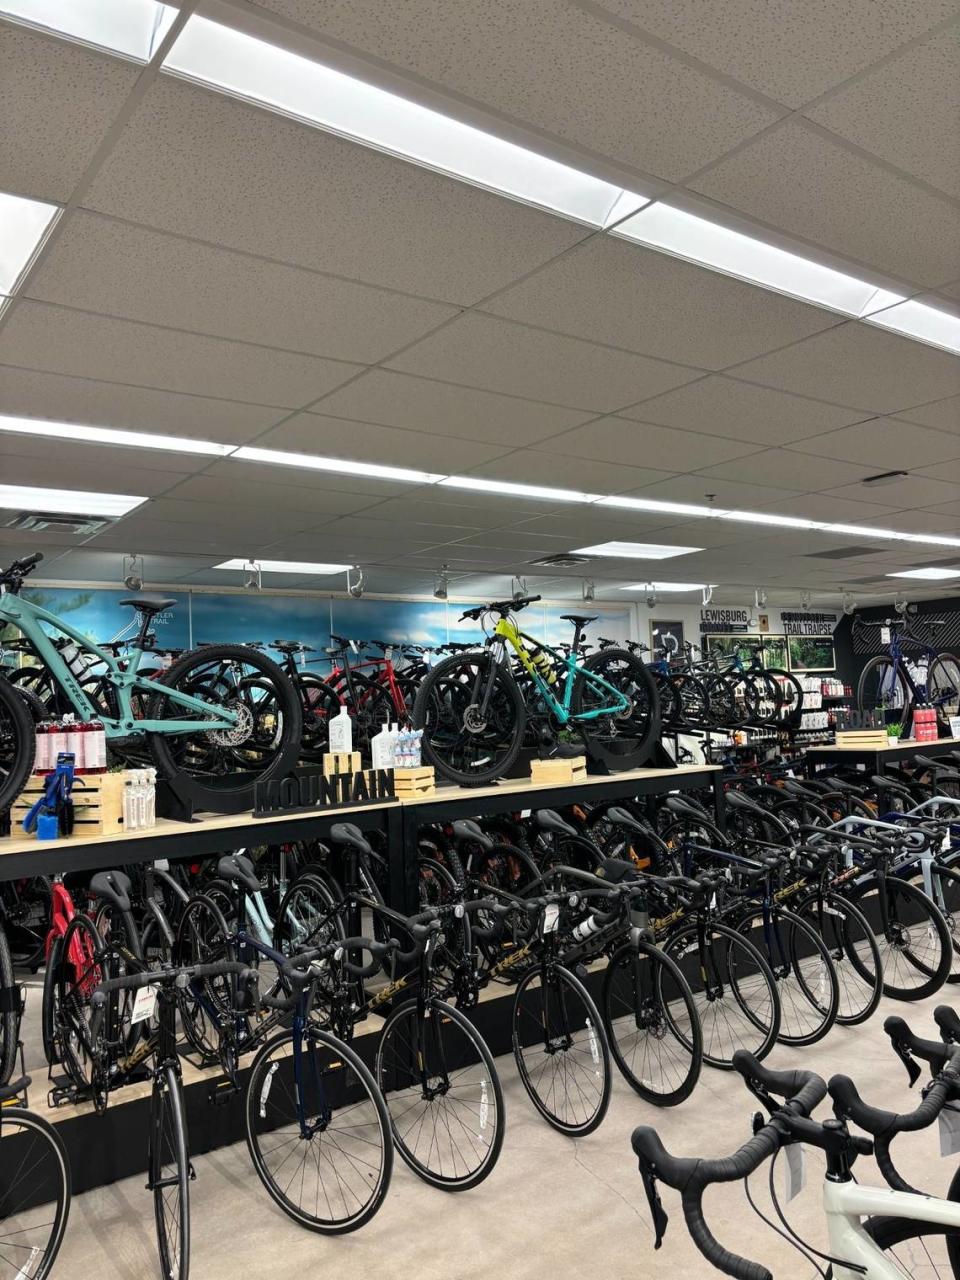 Trek Bicycle, 321 Benner Pike, opened Friday at the Benner Pike Shops. Trek Bicycle/Photo provided